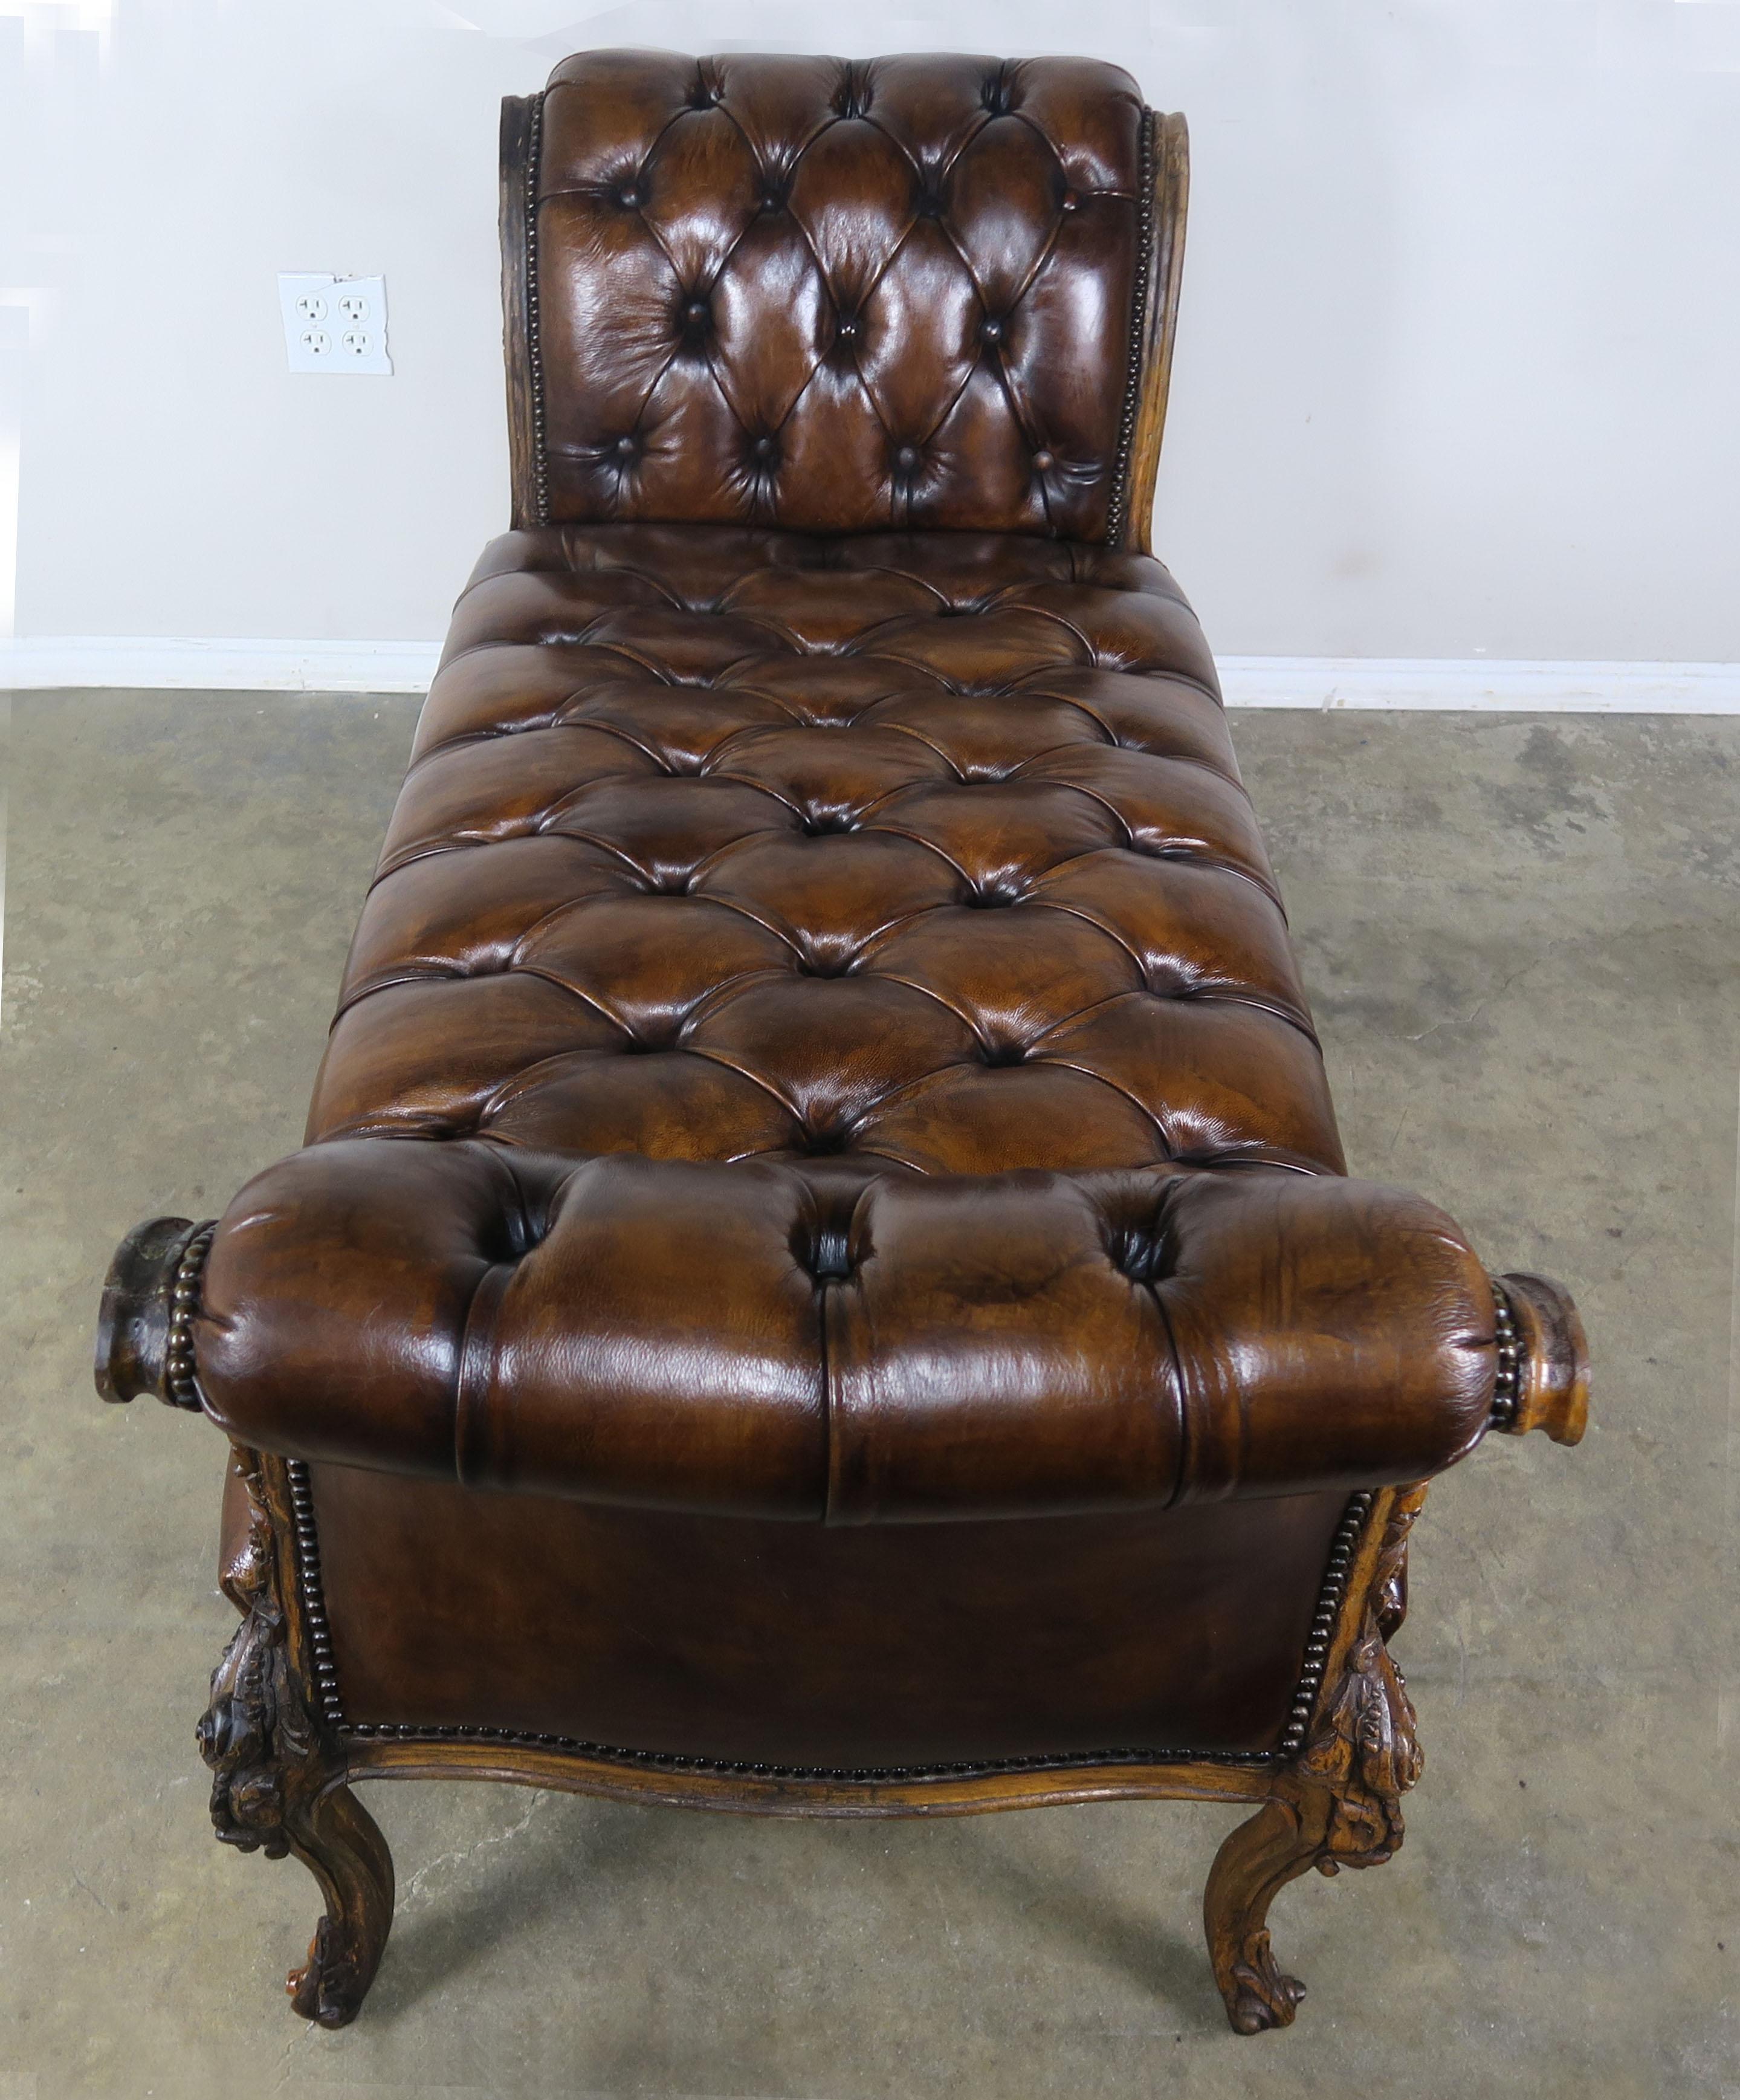 19th Century French Leather Six-Legged Tufted Bench 3